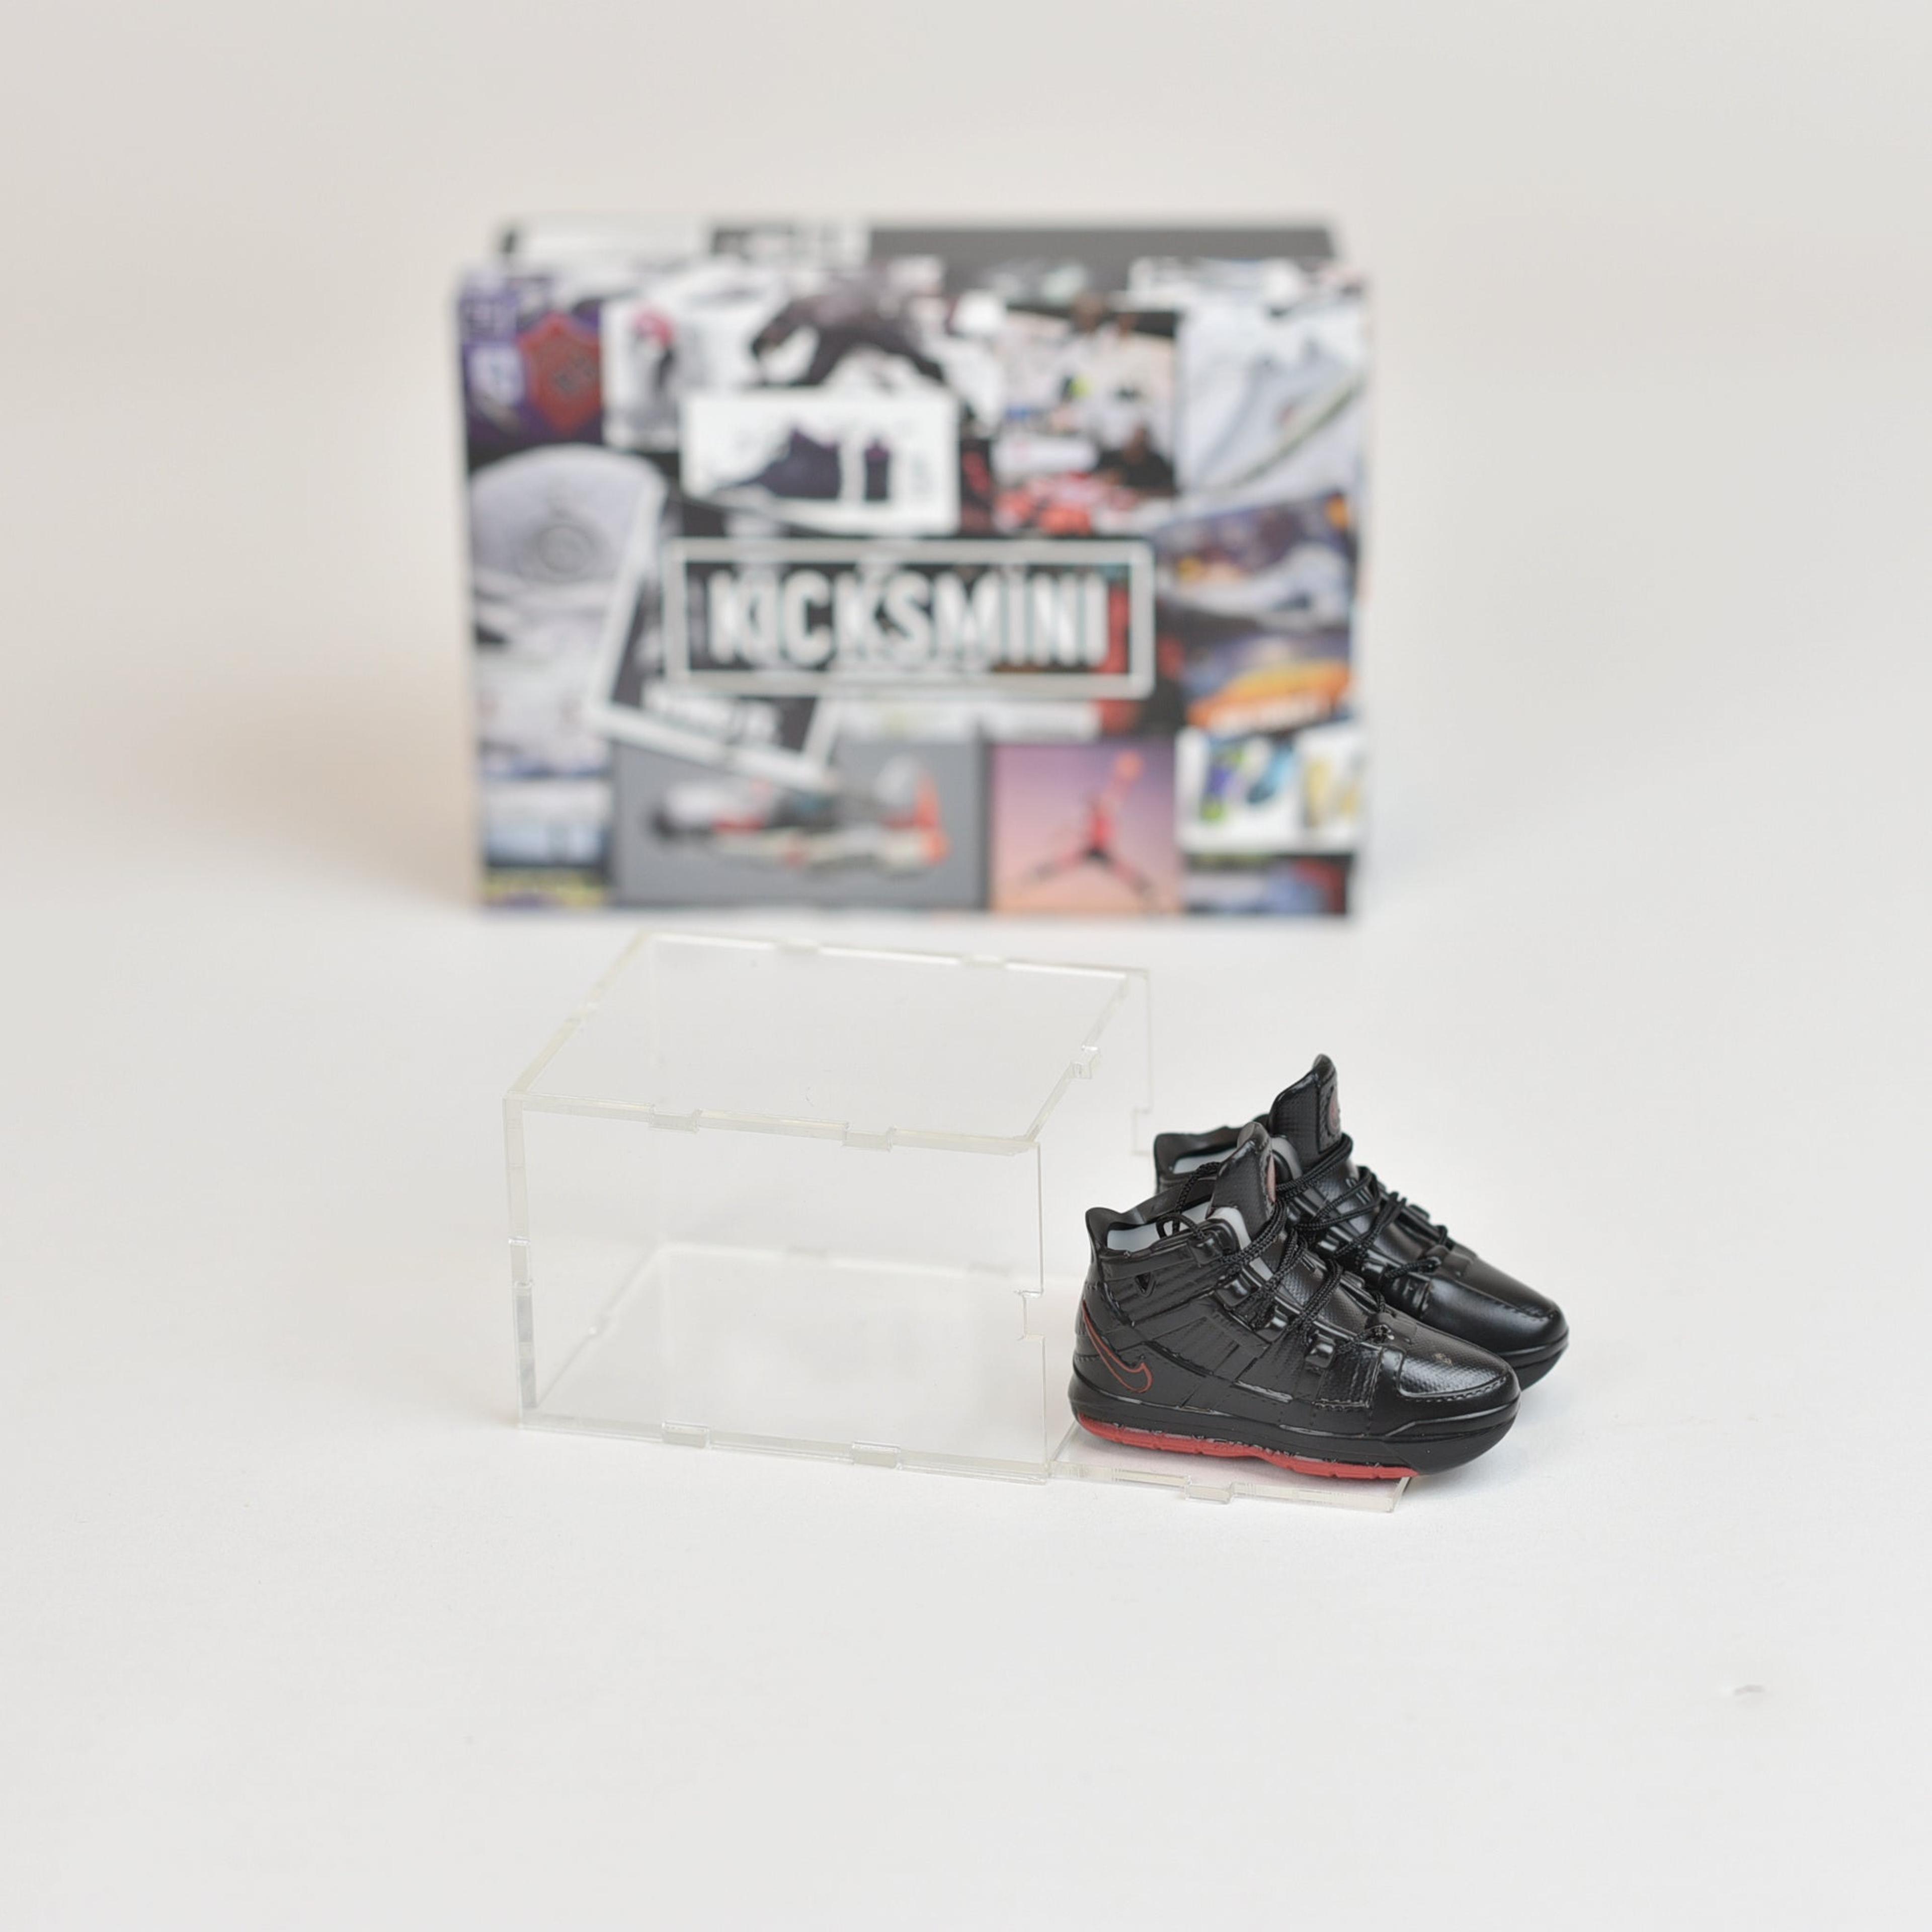 Alternate View 21 of Kobe Bryant/LeBron James/Steph Curry Mini Sneaker Collection wit